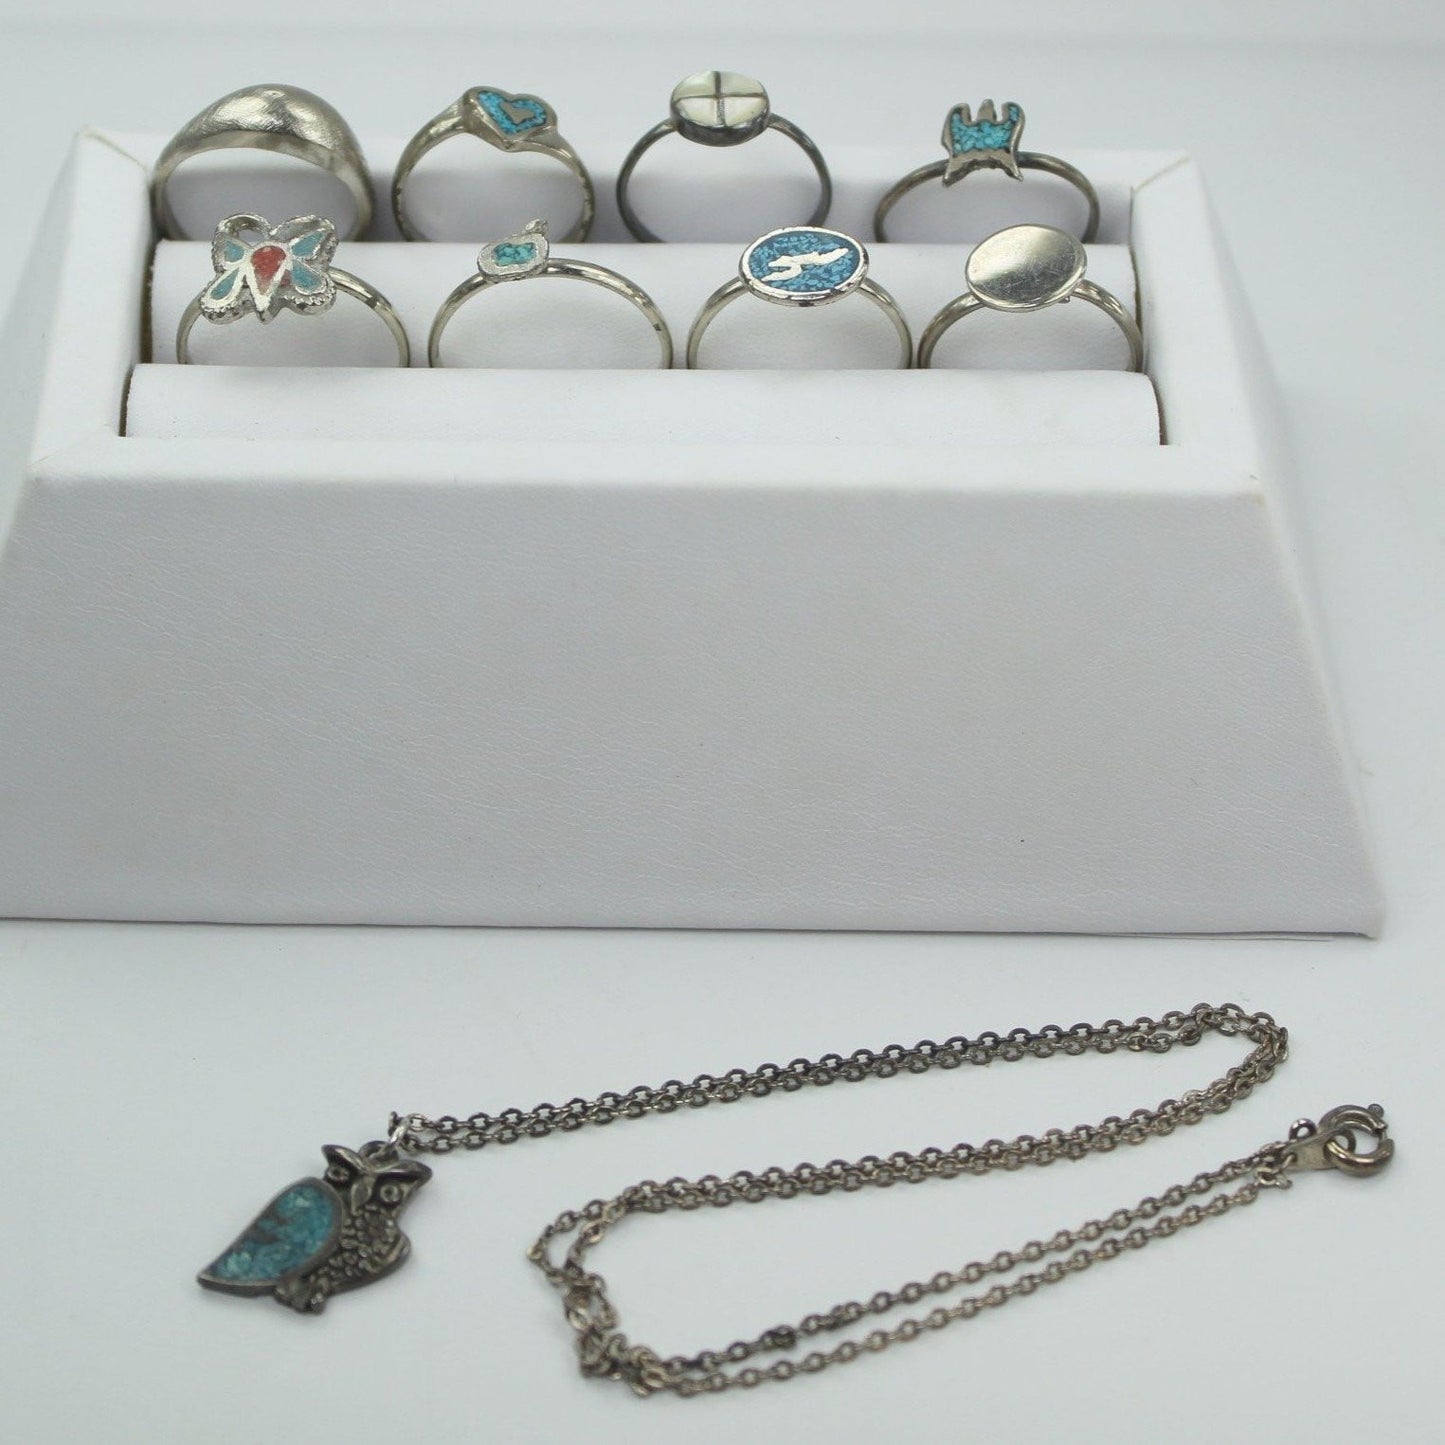 Lot 8 Costume Rings 1 Owl  Necklace Turquoise Southwest Designs